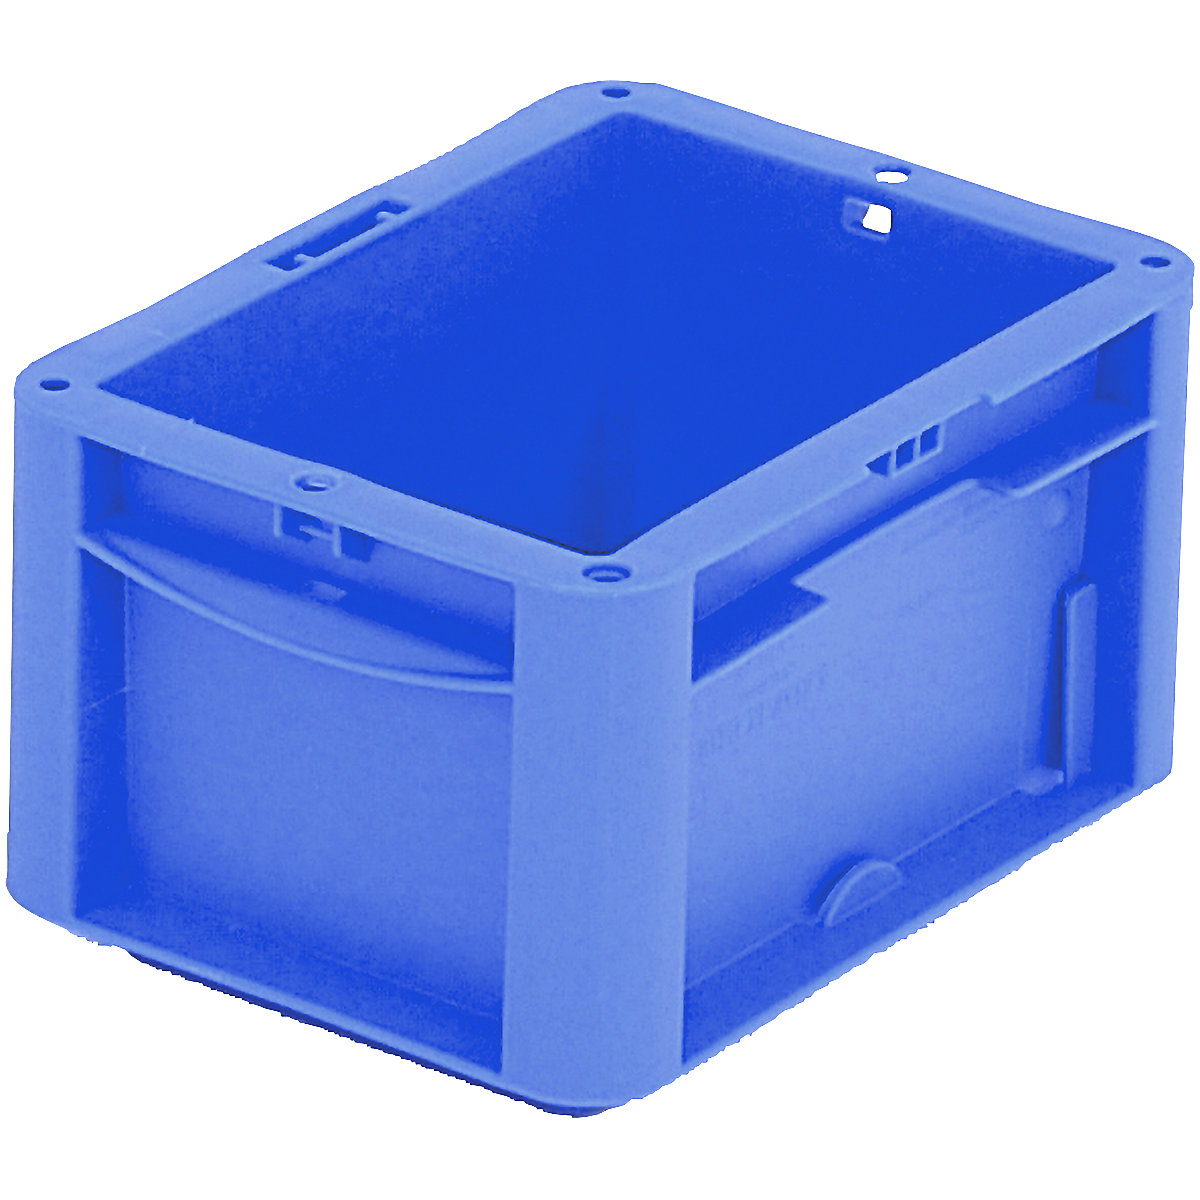 XL Euro stacking container - BITO